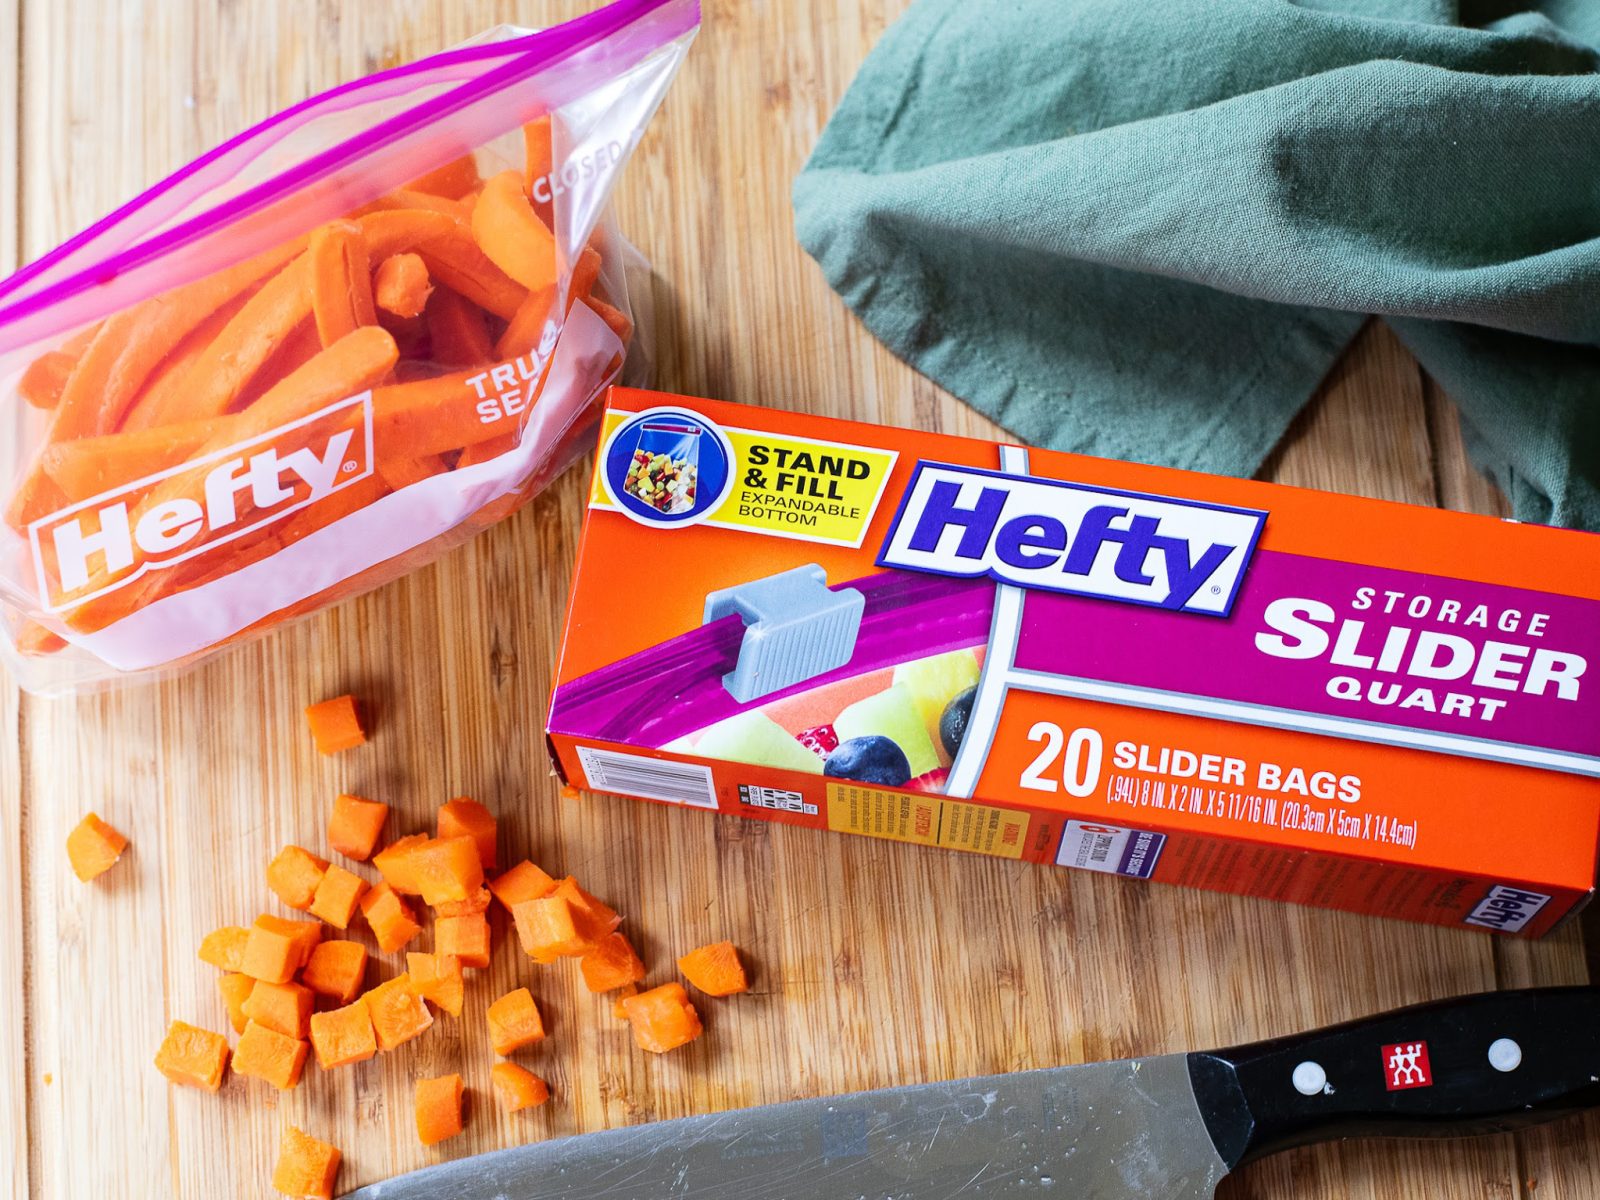 Our Point of View on Hefty Slider Freezer Storage Bags From